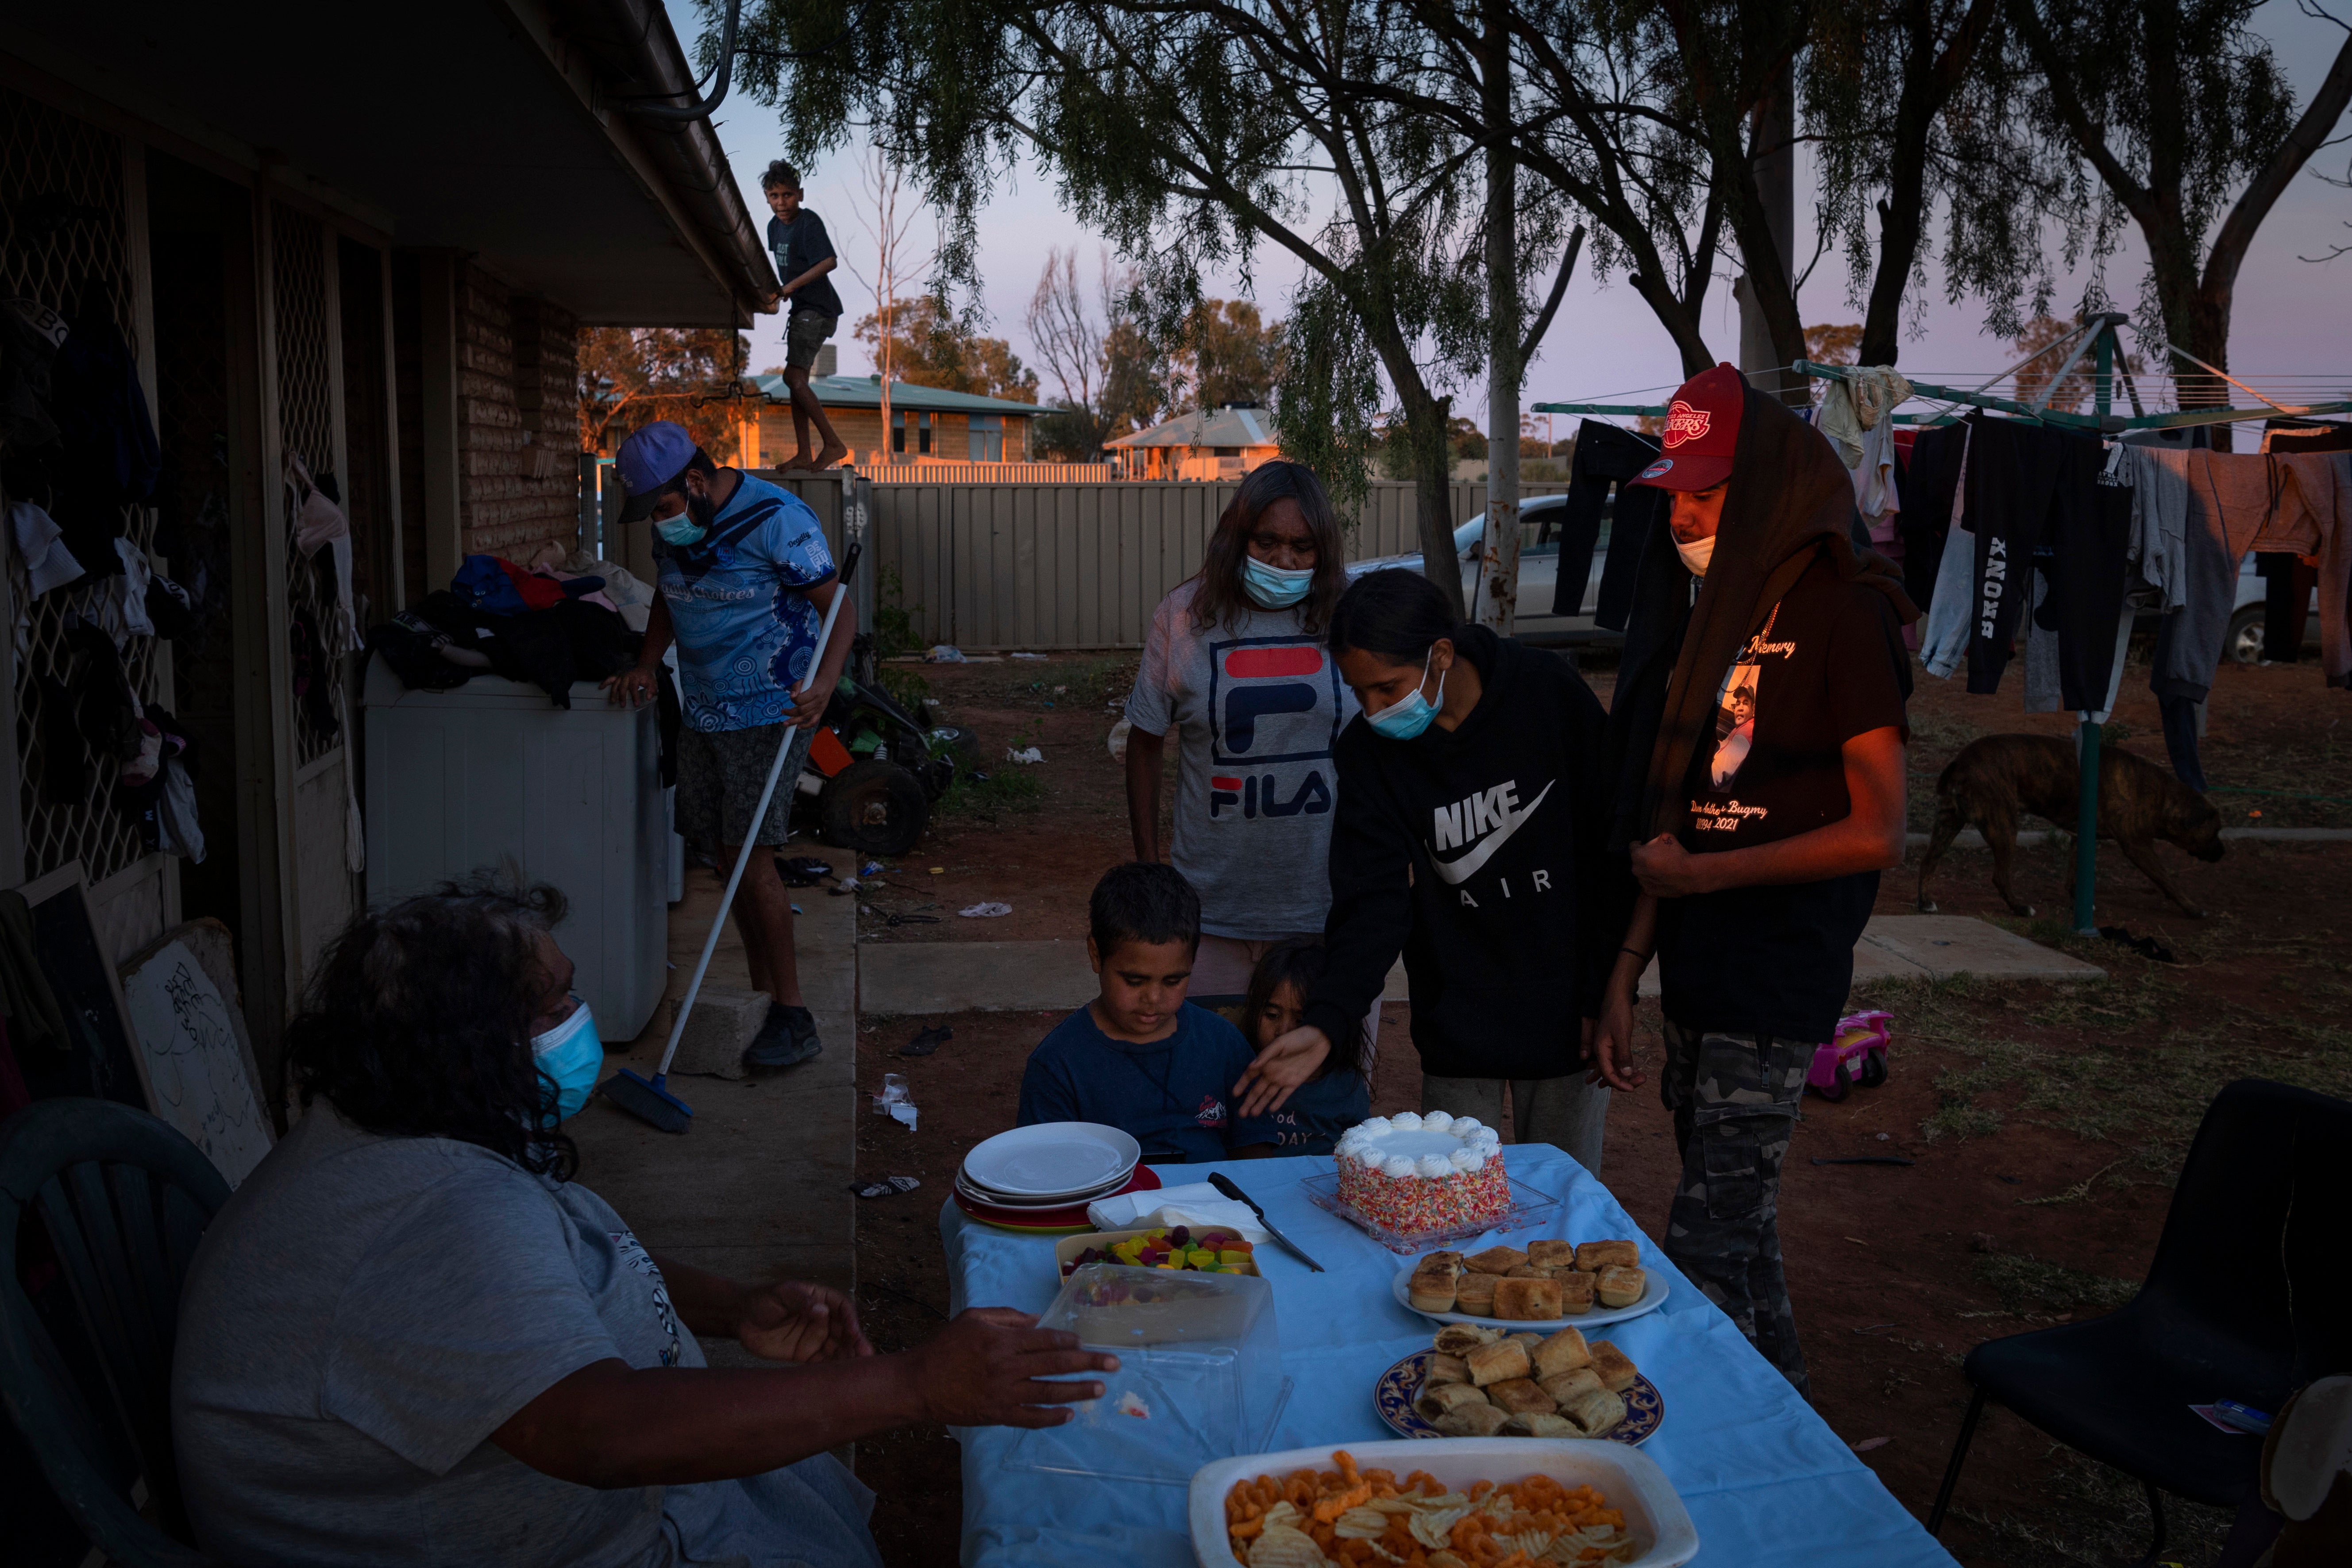 Nathaniel Bugmy’s seventh birthday party. He spoke to his mother Merinda Bugmy on FaceTime, as she was in isolation because of the coronavirus